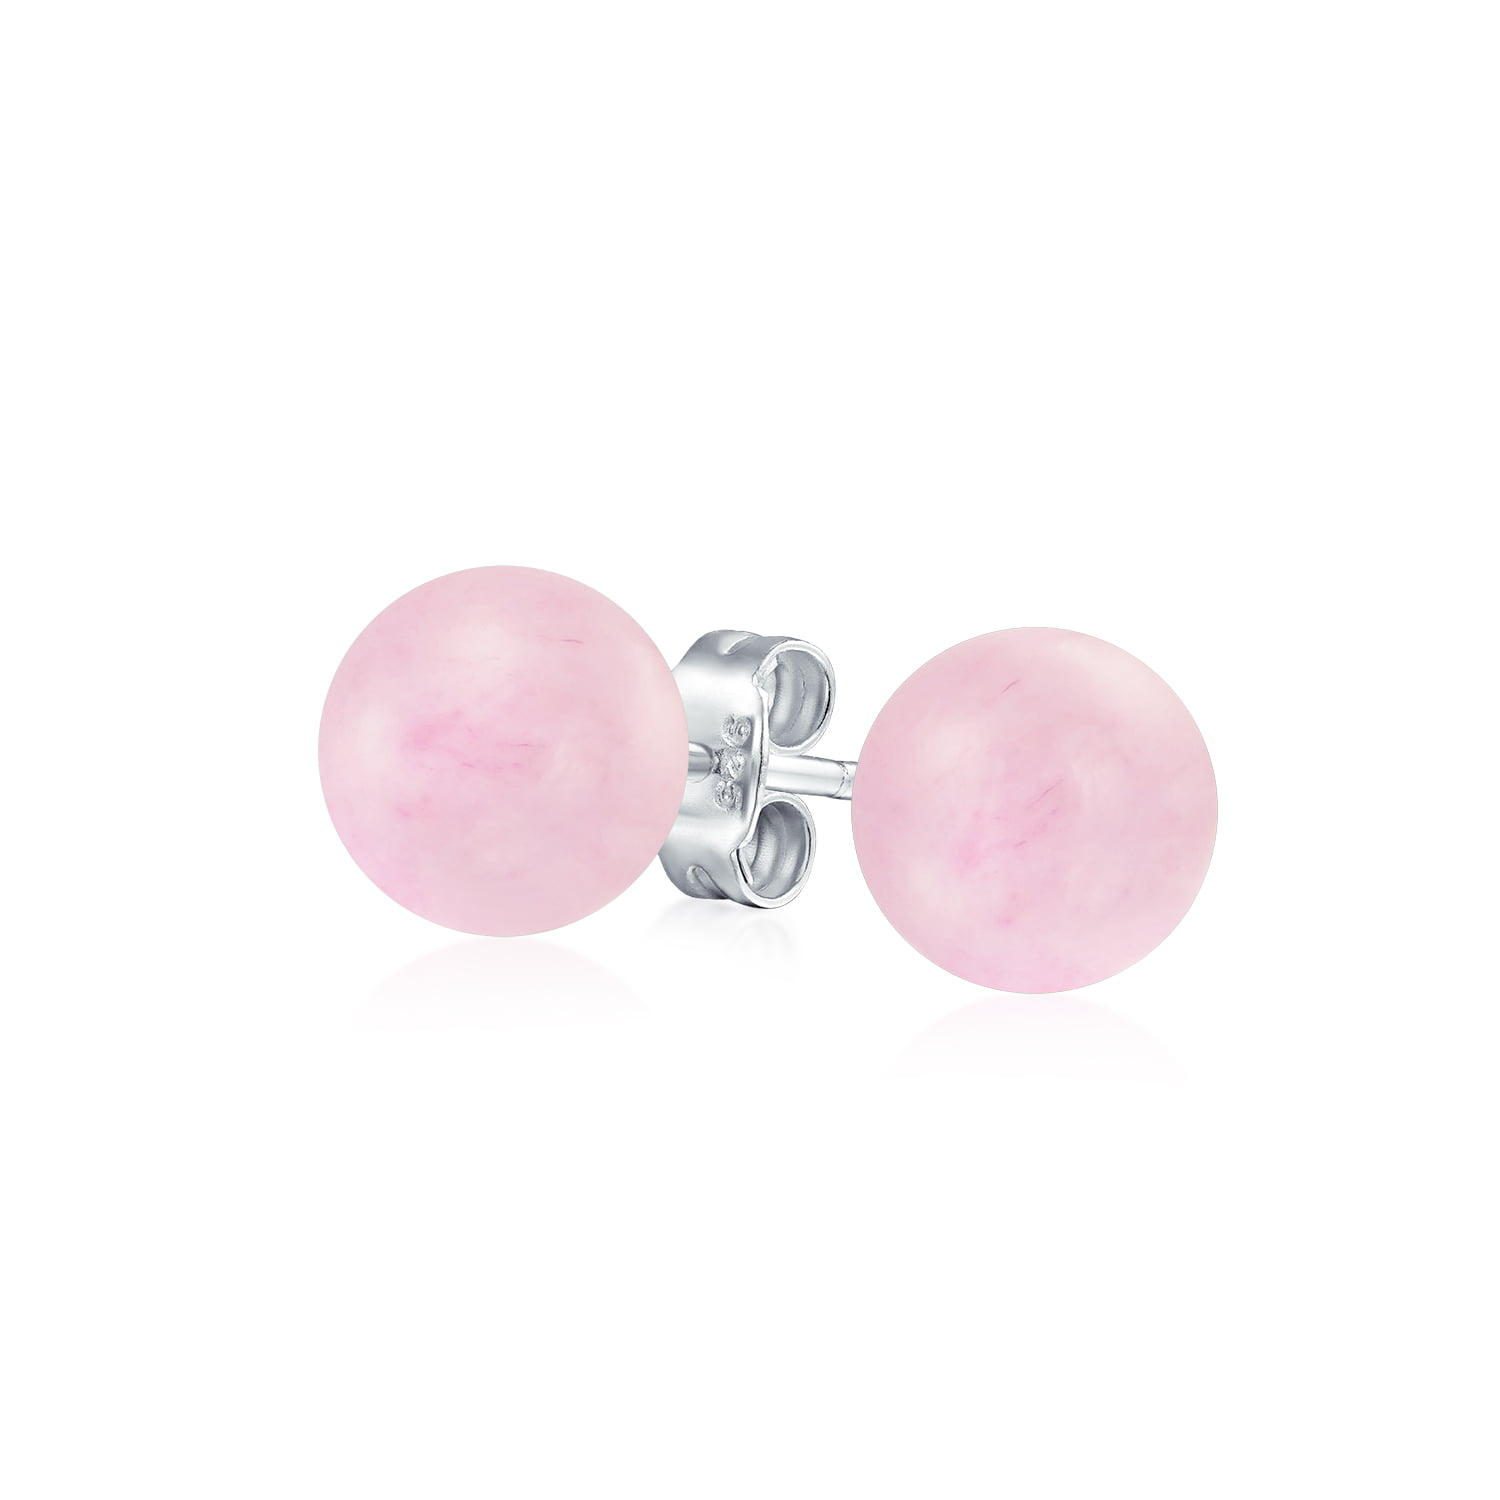 Simple Plain 8MM Gemstone Round Bead Ball Stud Earrings For Women For Teen 925 Sterling Silver Birthstones More Colors 